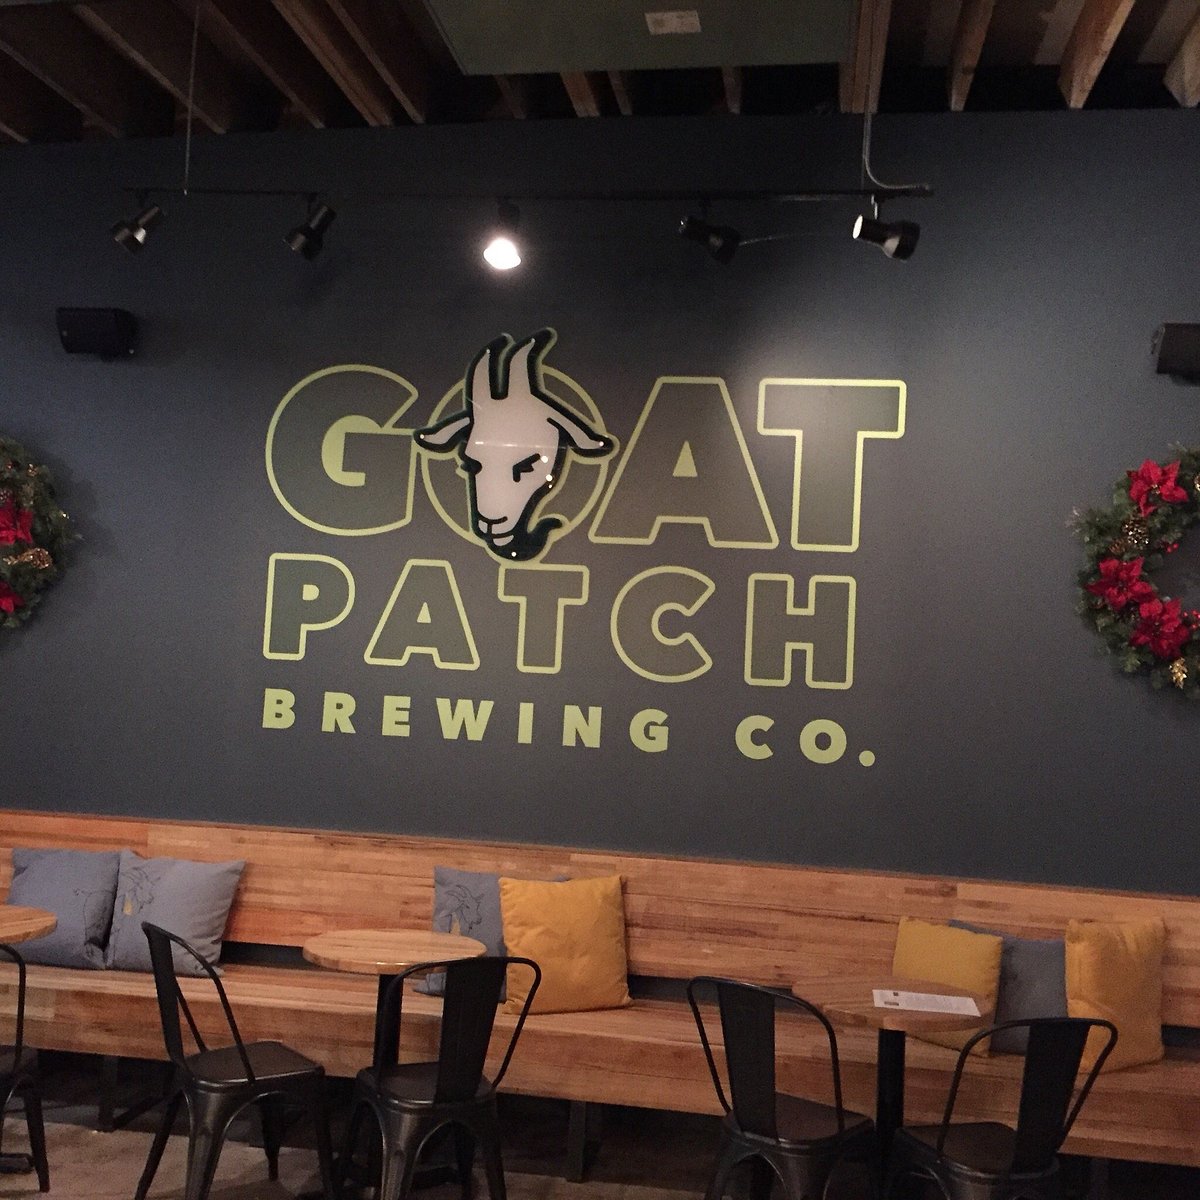 Goat Patch Brewing Company